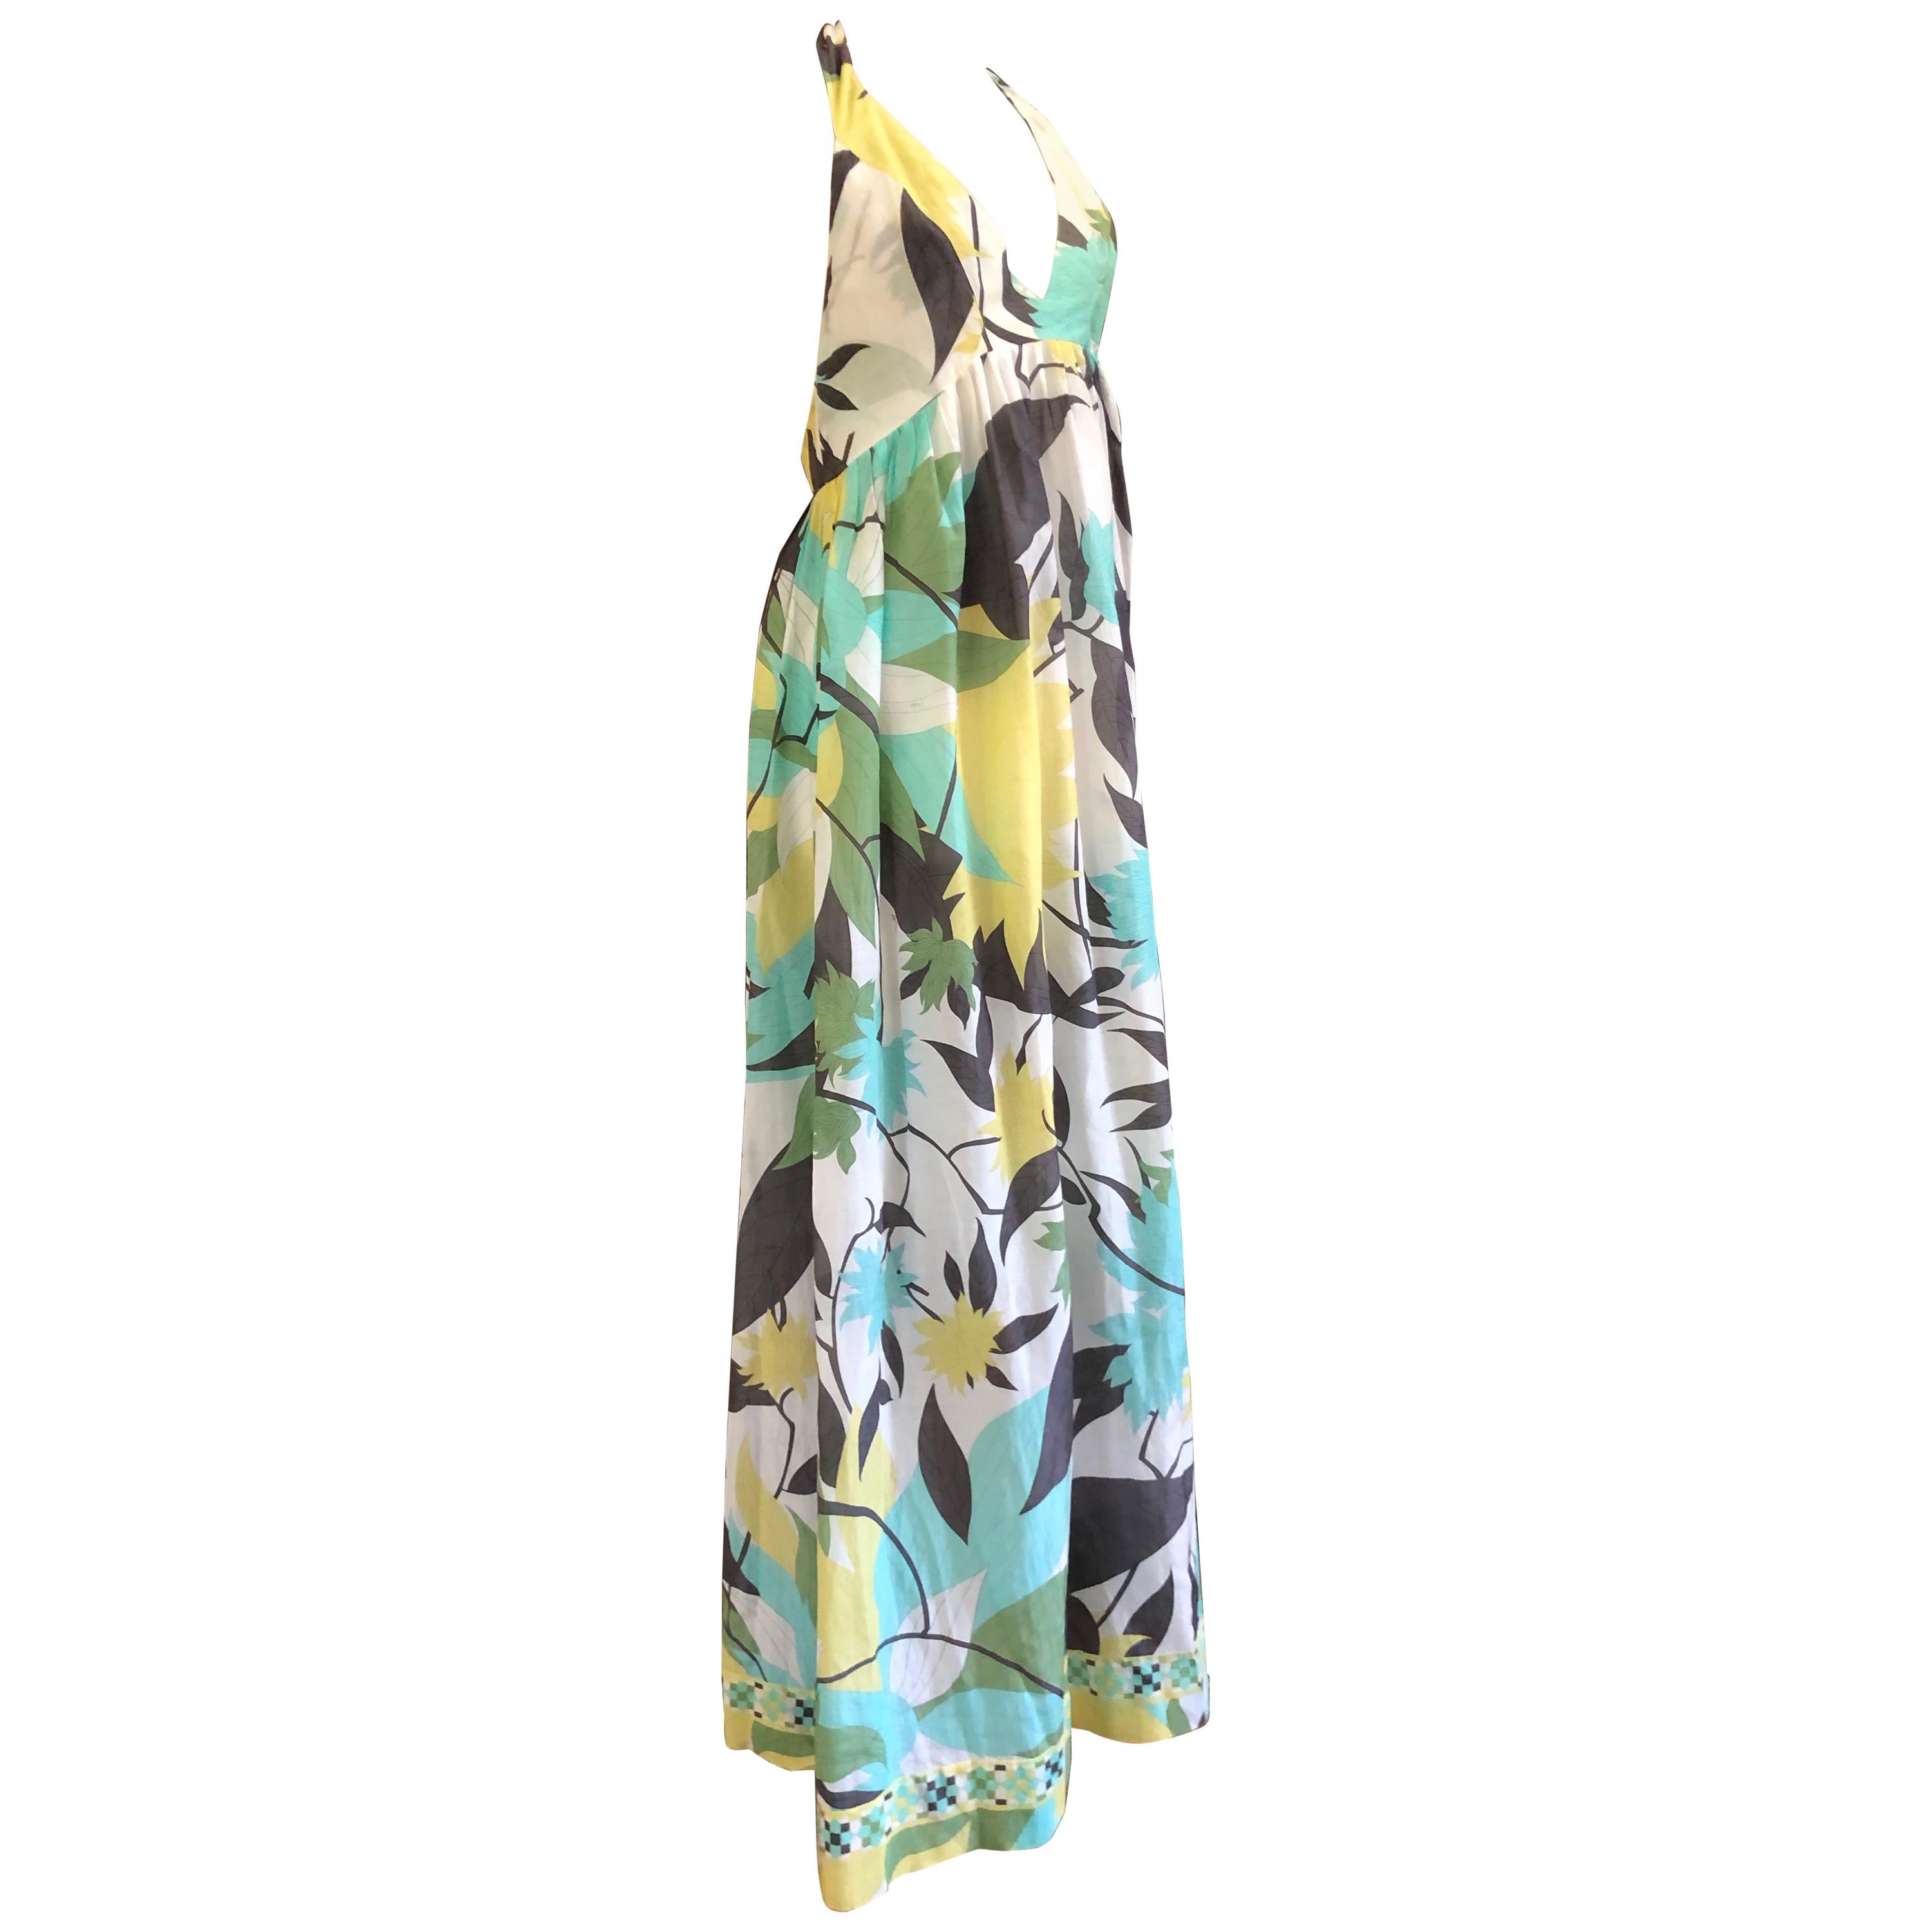 Emilio Pucci Cotton & Silk Halter Style Dress or Beach Cover Up For Sale